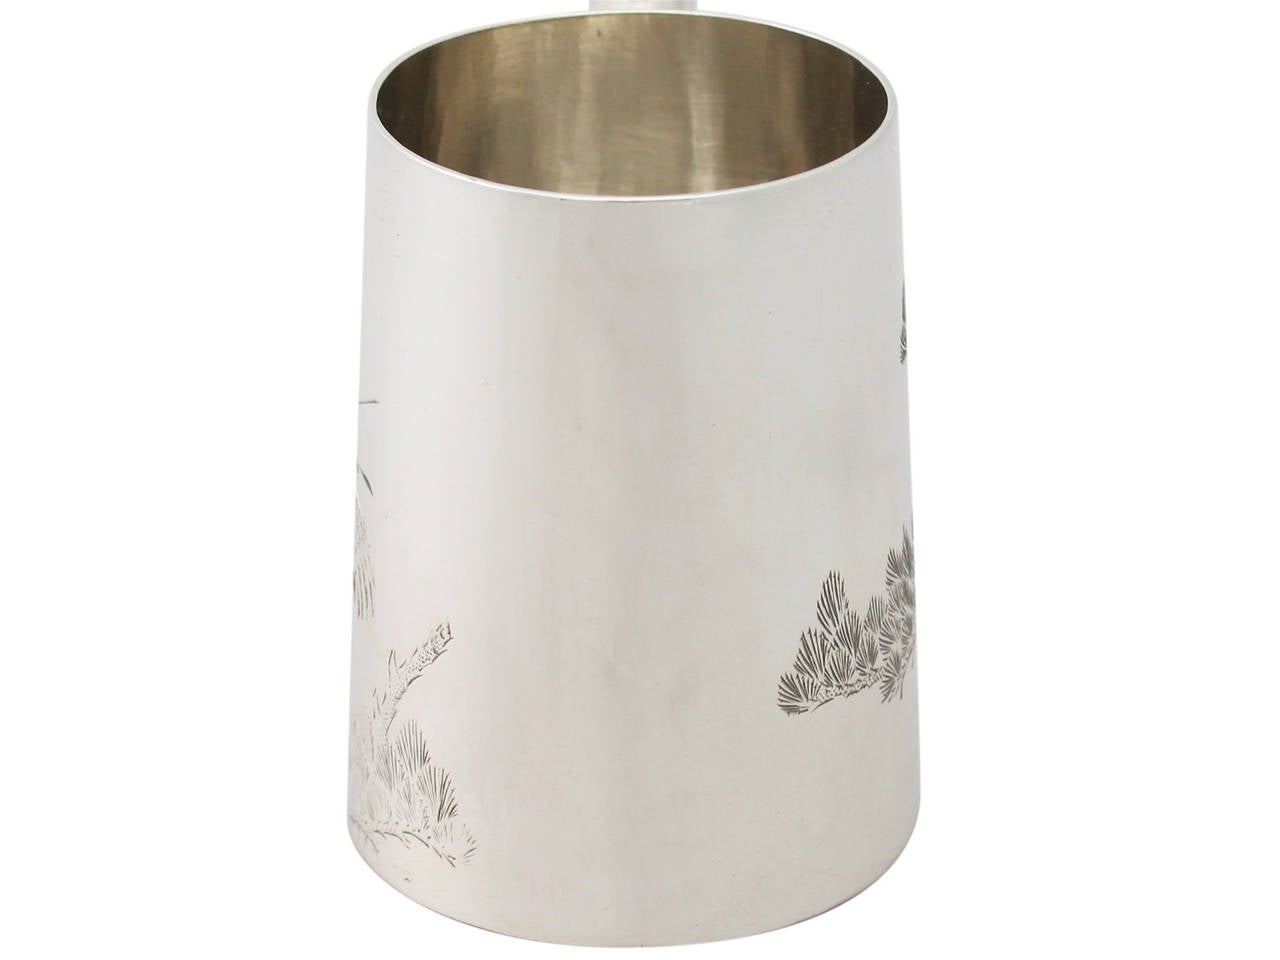 A fine antique Chinese Export Silver christening mug; an addition to our Chinese/Asian silverware collection.

This fine antique Chinese Export Silver (CES) christening mug has a cylindrical tapering form.

The surface of the mug is embellished